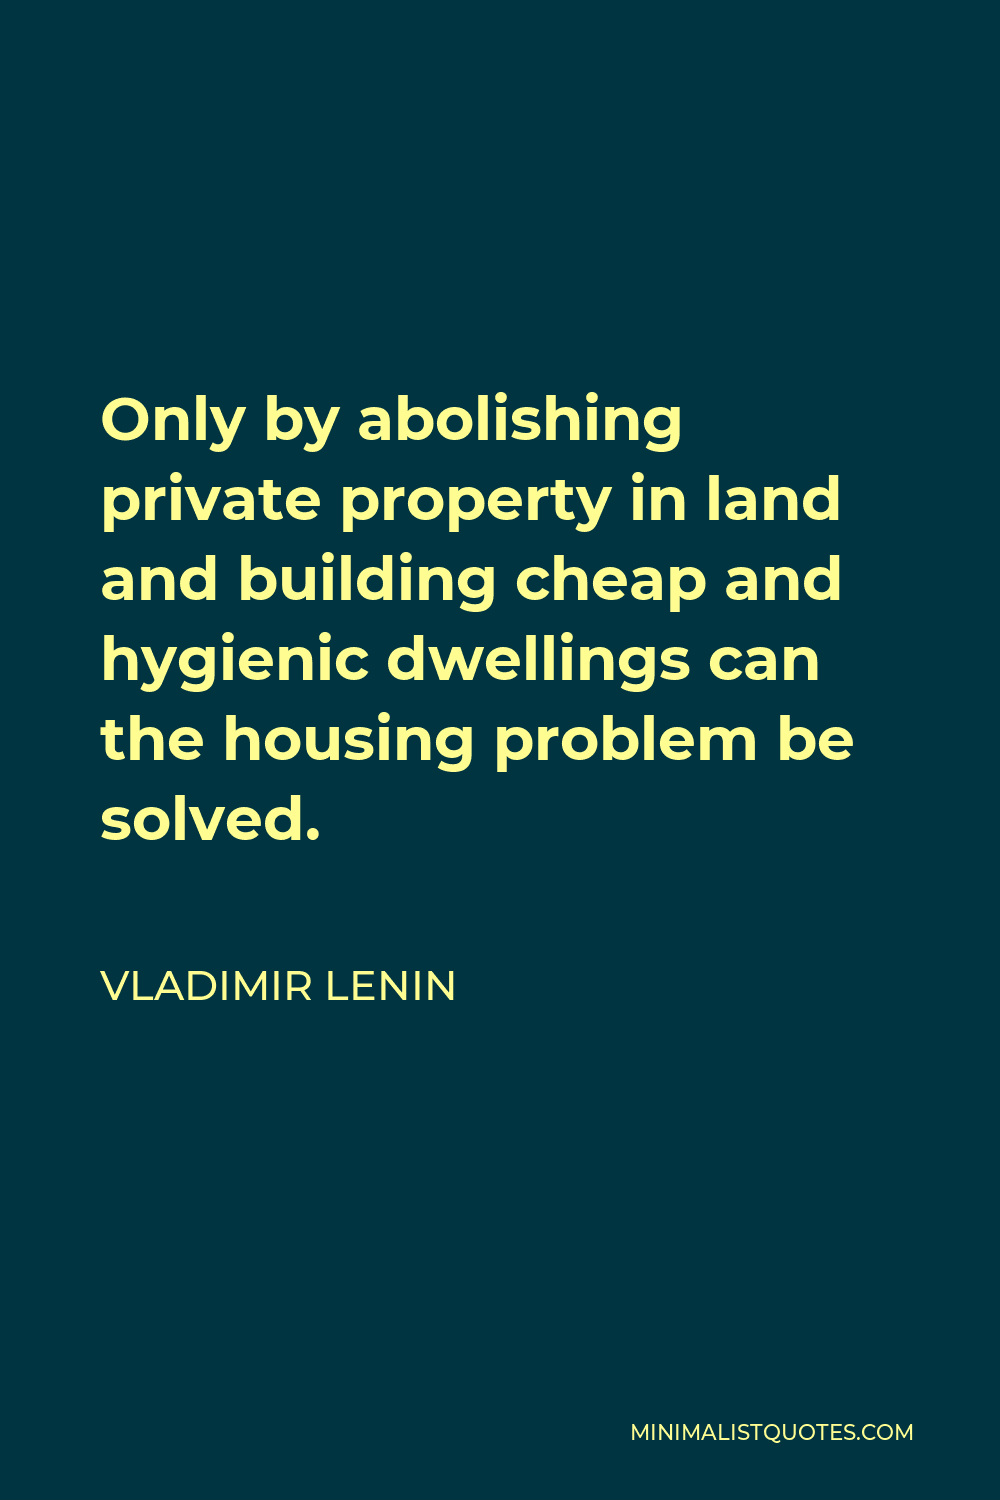 Vladimir Lenin Quote - Only by abolishing private property in land and building cheap and hygienic dwellings can the housing problem be solved.